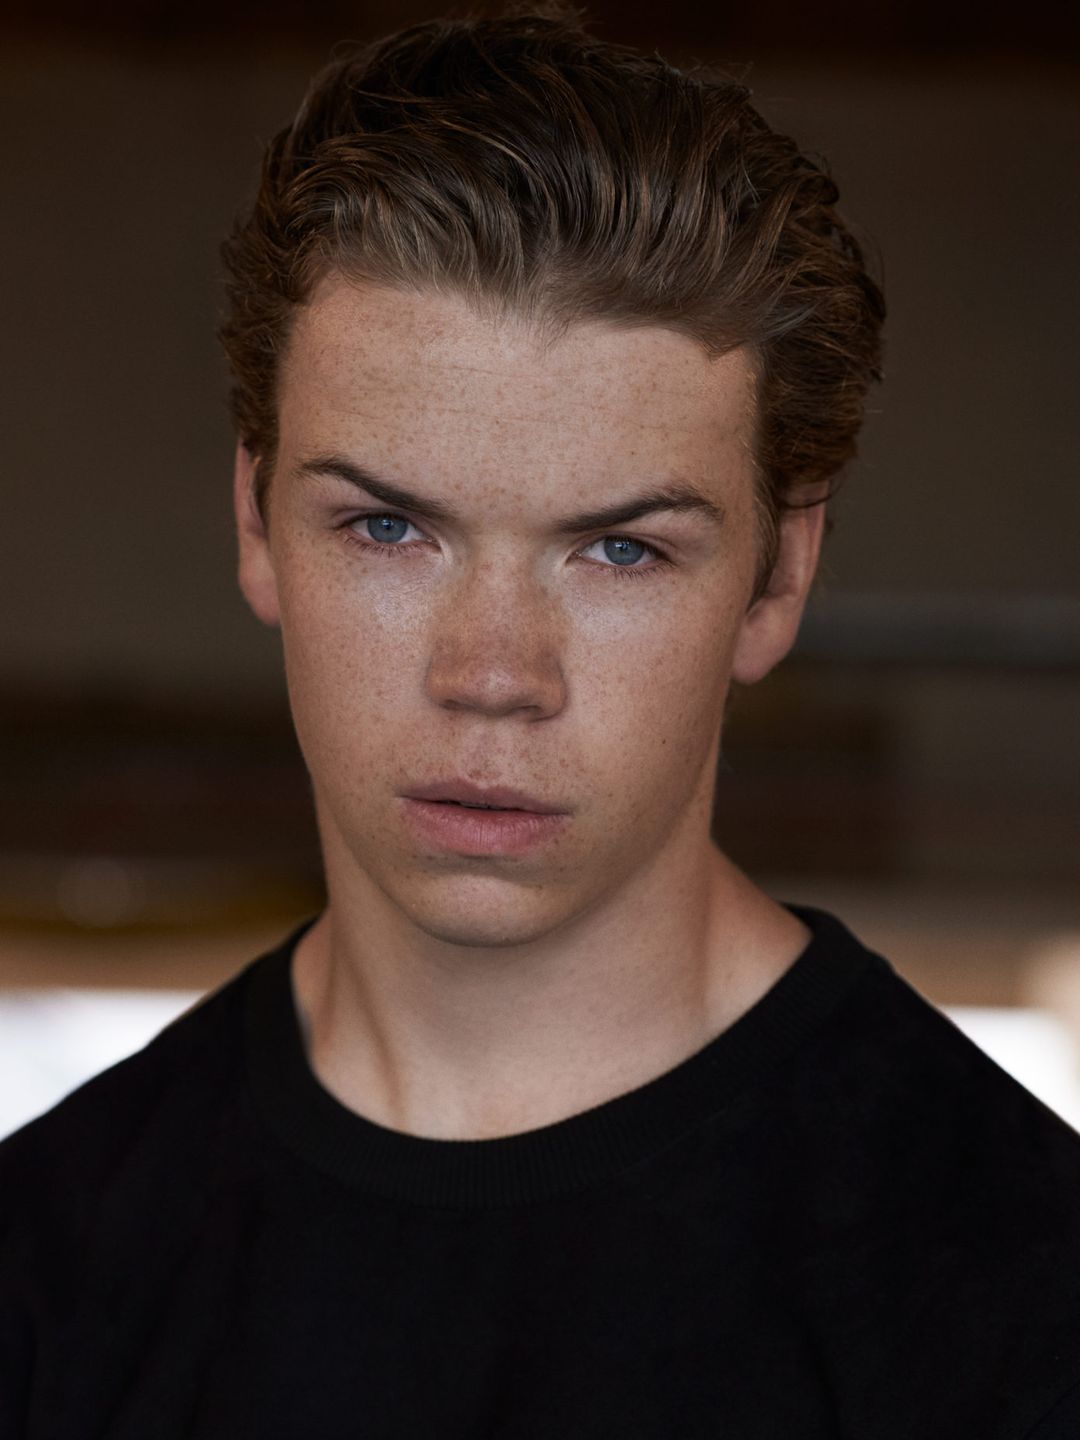 Will Poulter where did he study